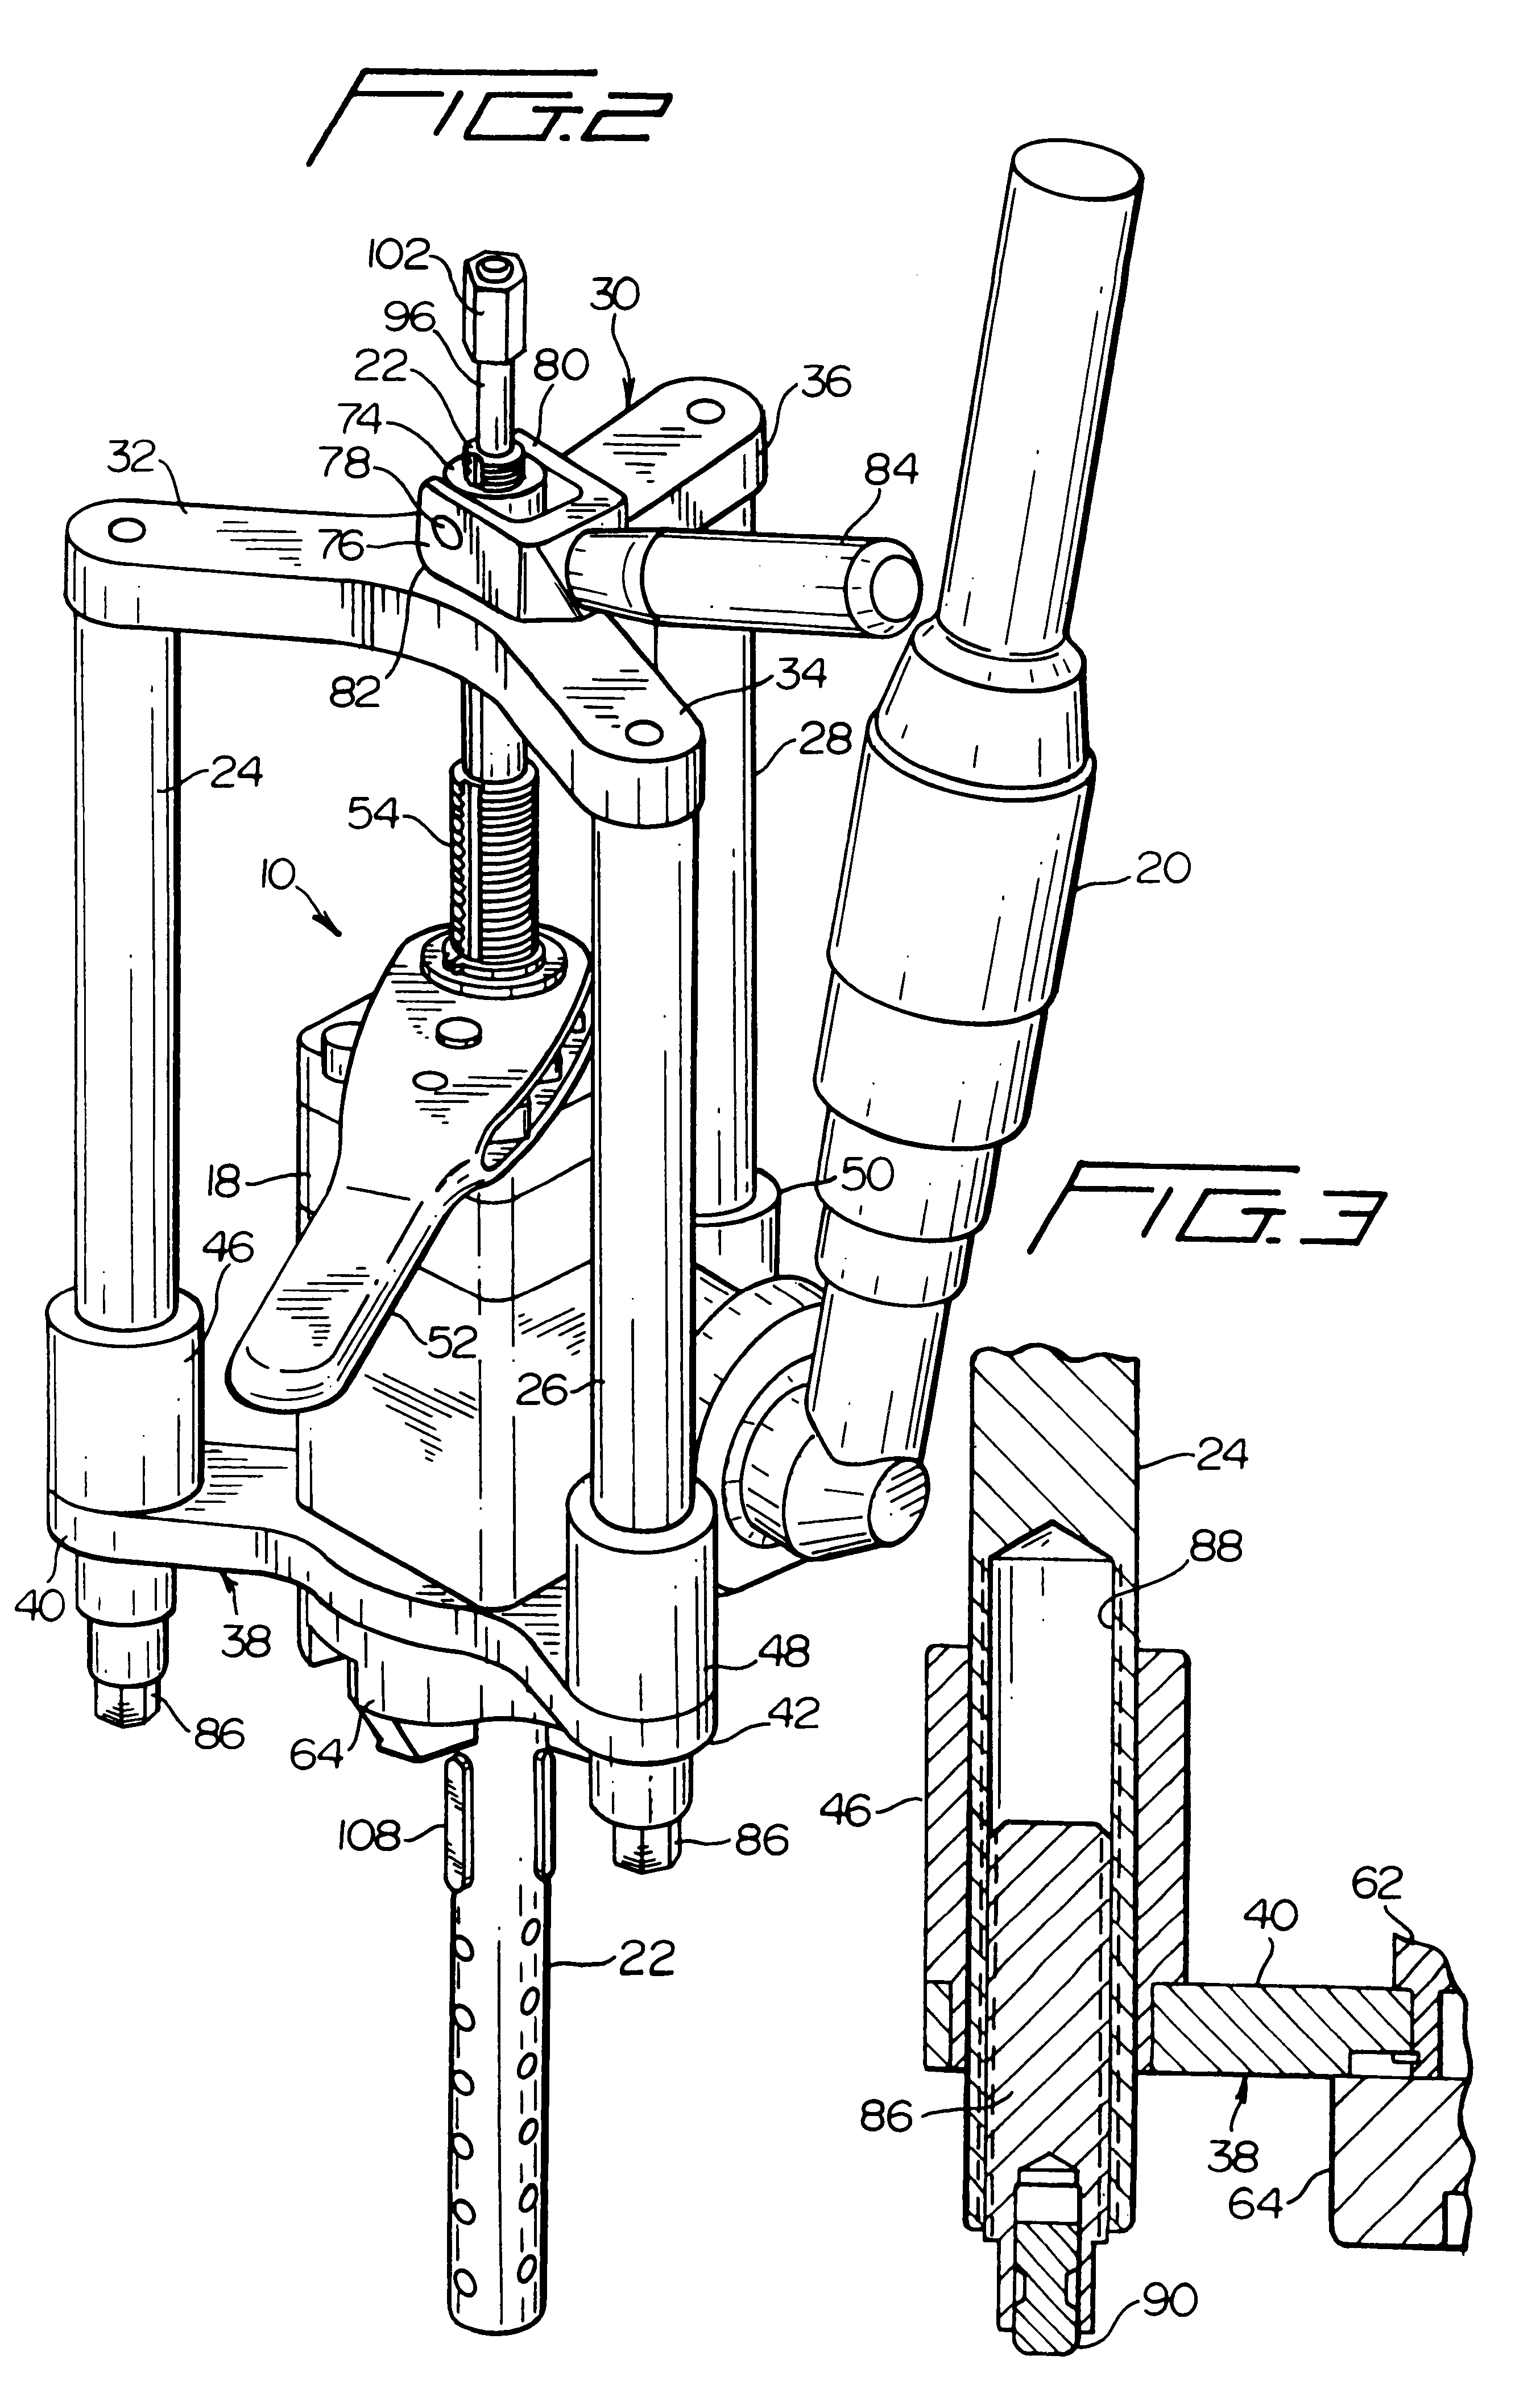 Portable machine tool for conditioning header tube openings for butt-welding tubes